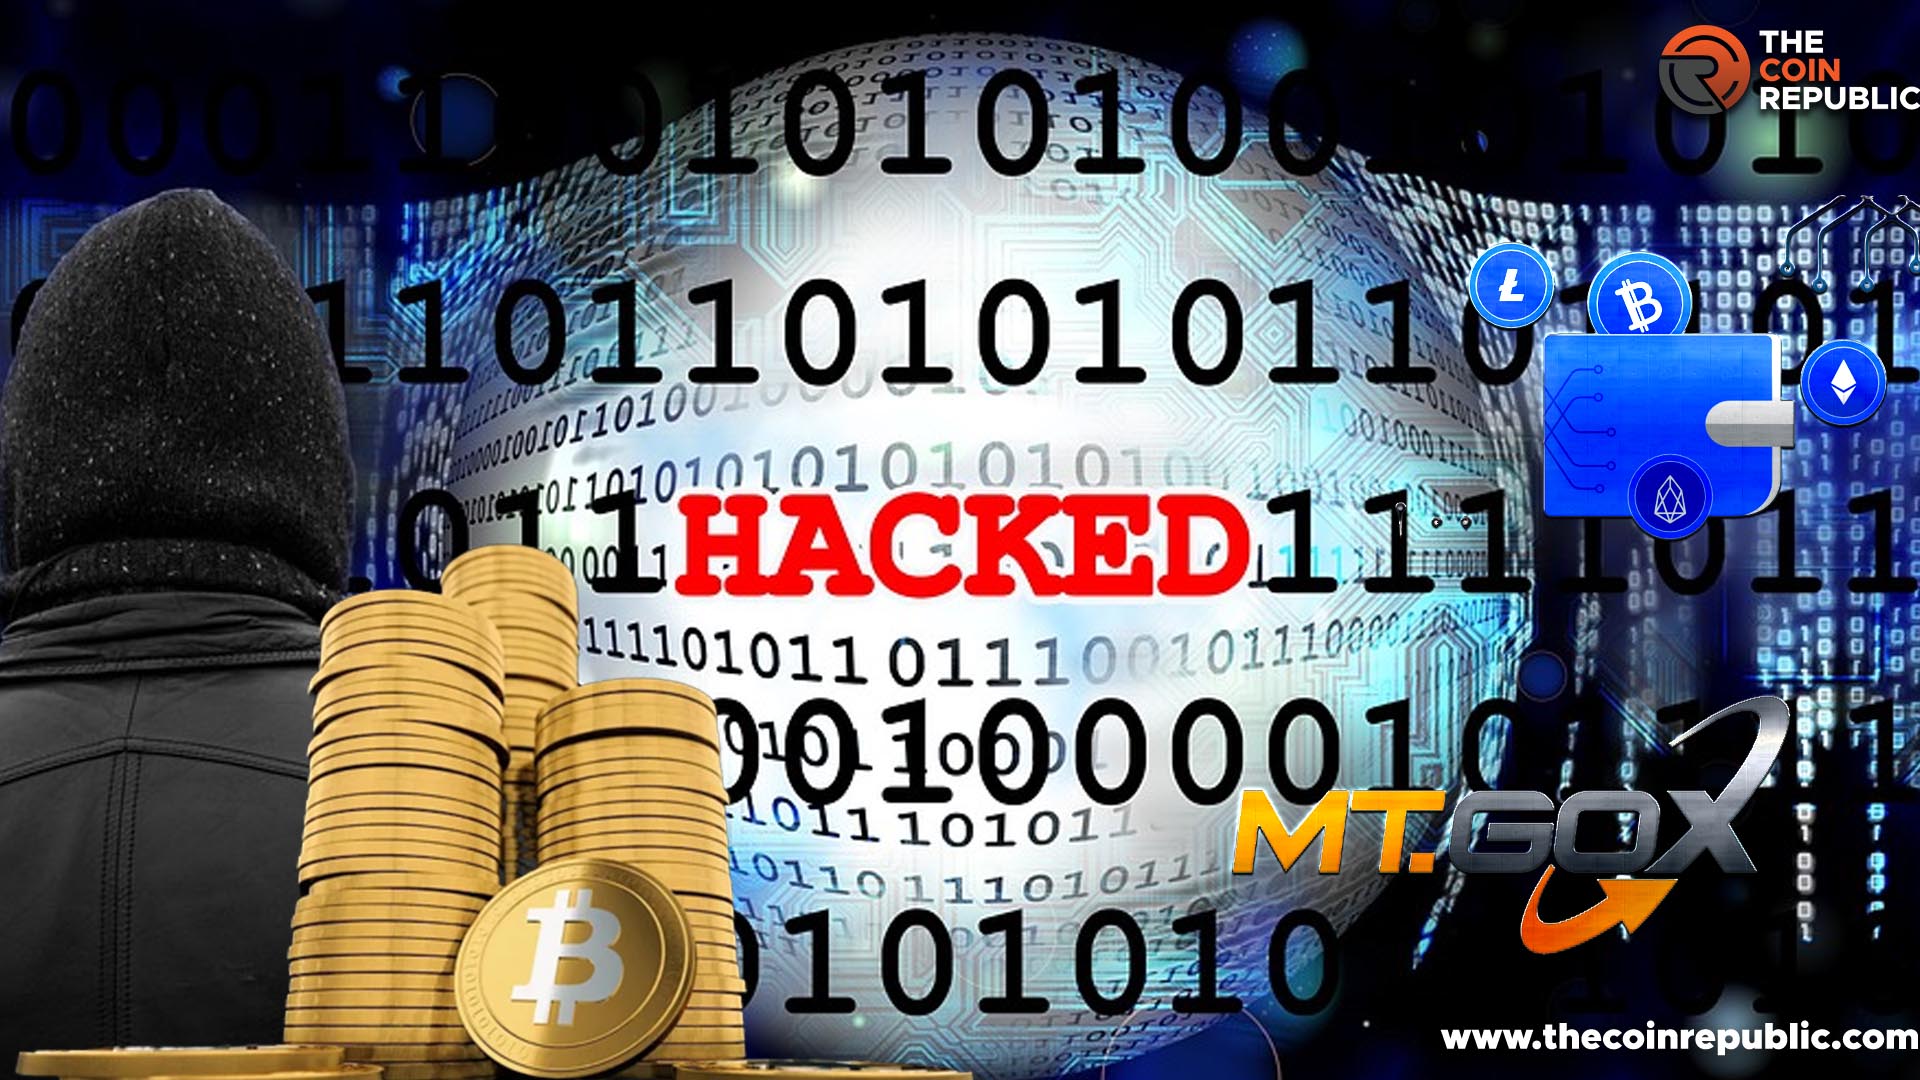 BTC Accounting To 10K Moved To Anonymous Wallets Associated With Mt. Gox Hack